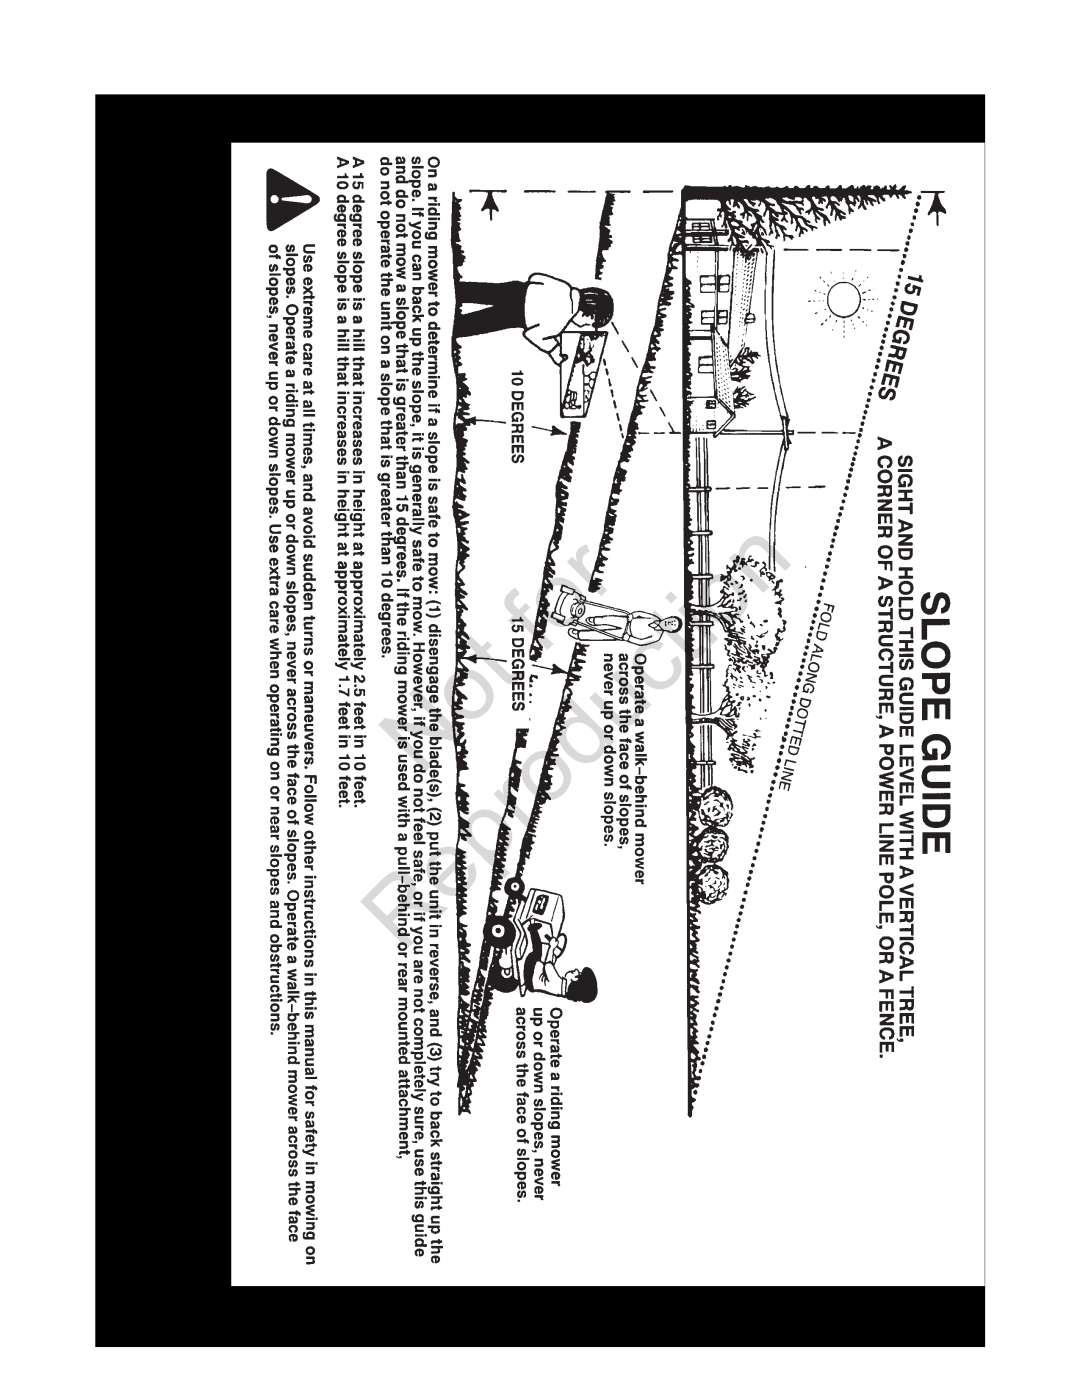 Snapper 20 manual Slope Guide, Reproduction 